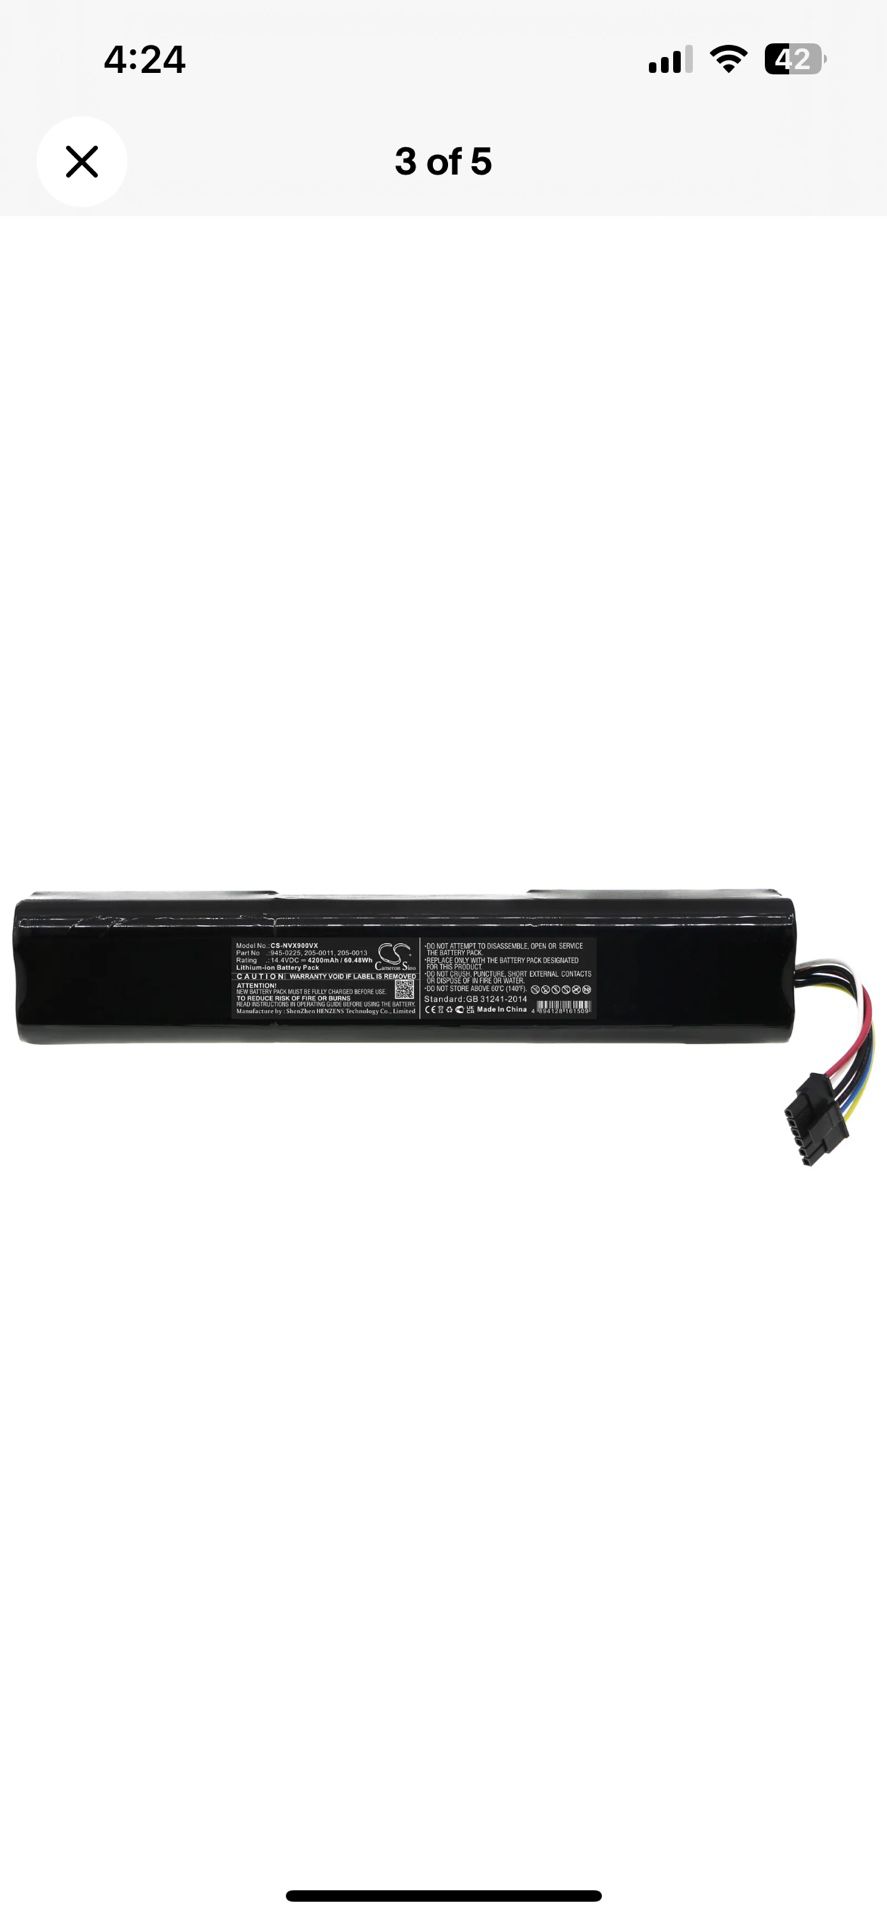 Battery for Neato Botvac Connected D3 D5 D4 D6 D7 (contact info removed) (contact info removed) (contact info removed)